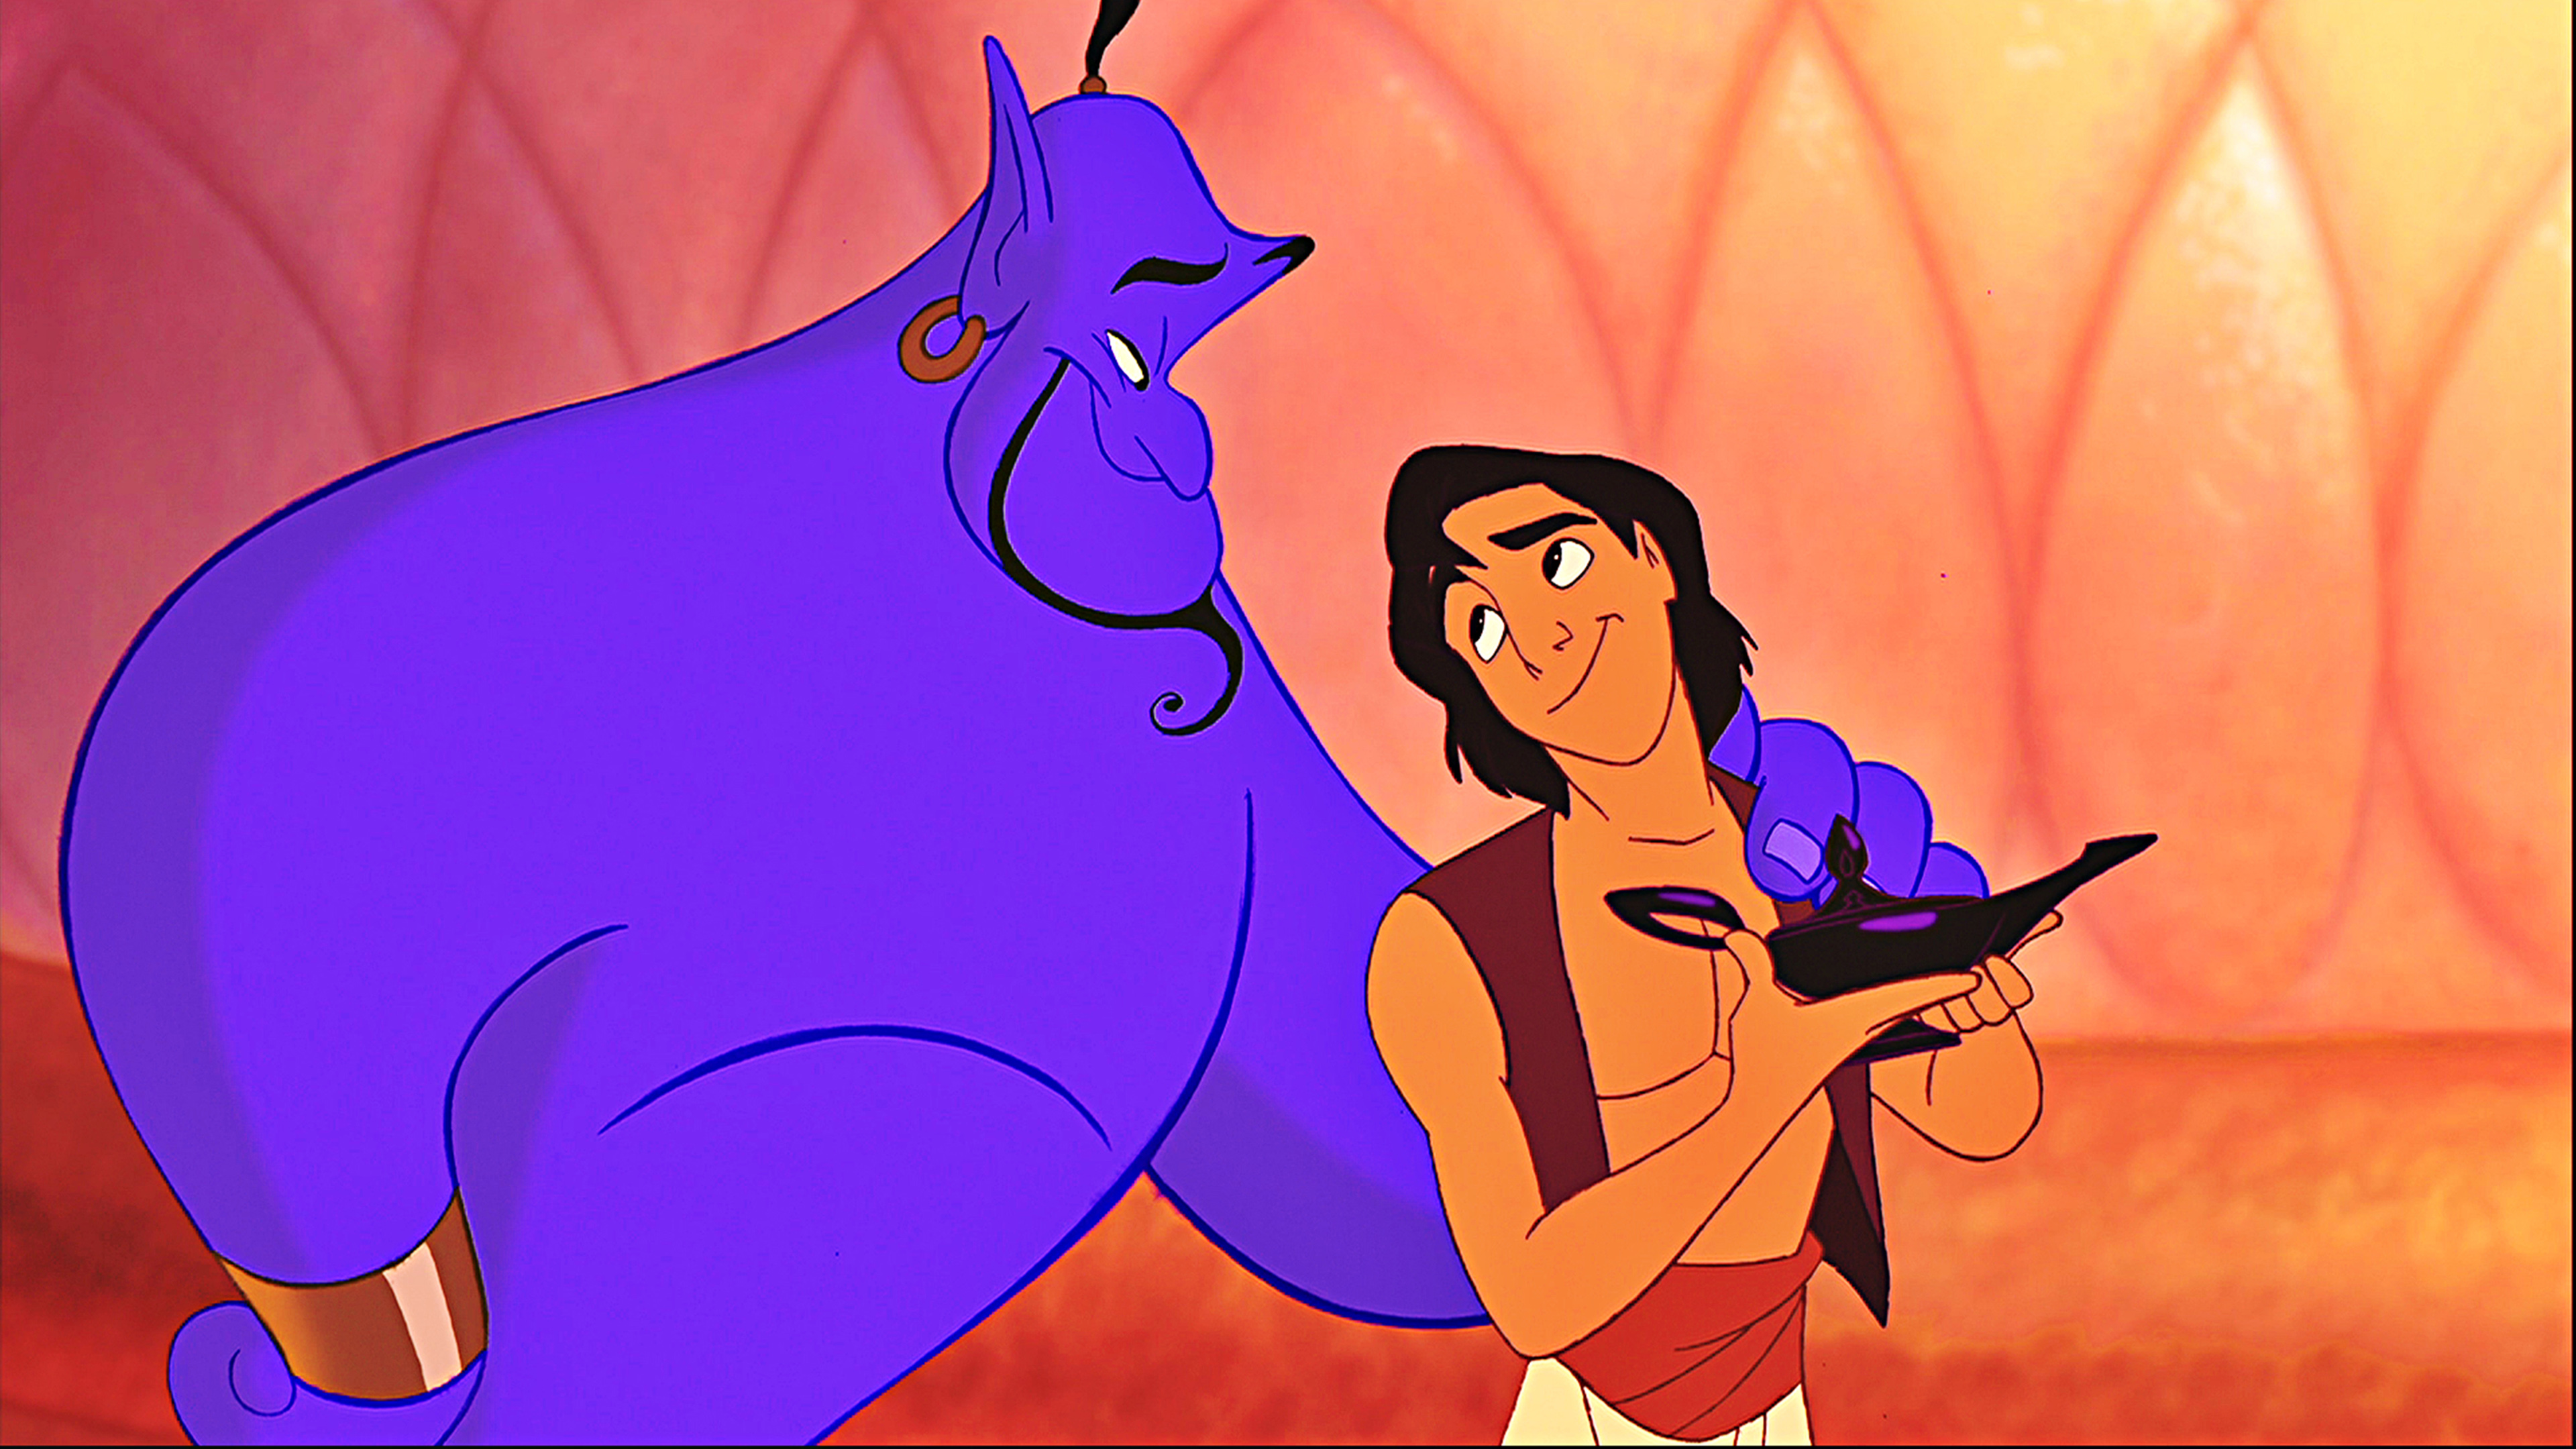 Aladdin And Genie Friend From The Magic Lamp Cartoons Wallpapers Hd  3840x2160 : 